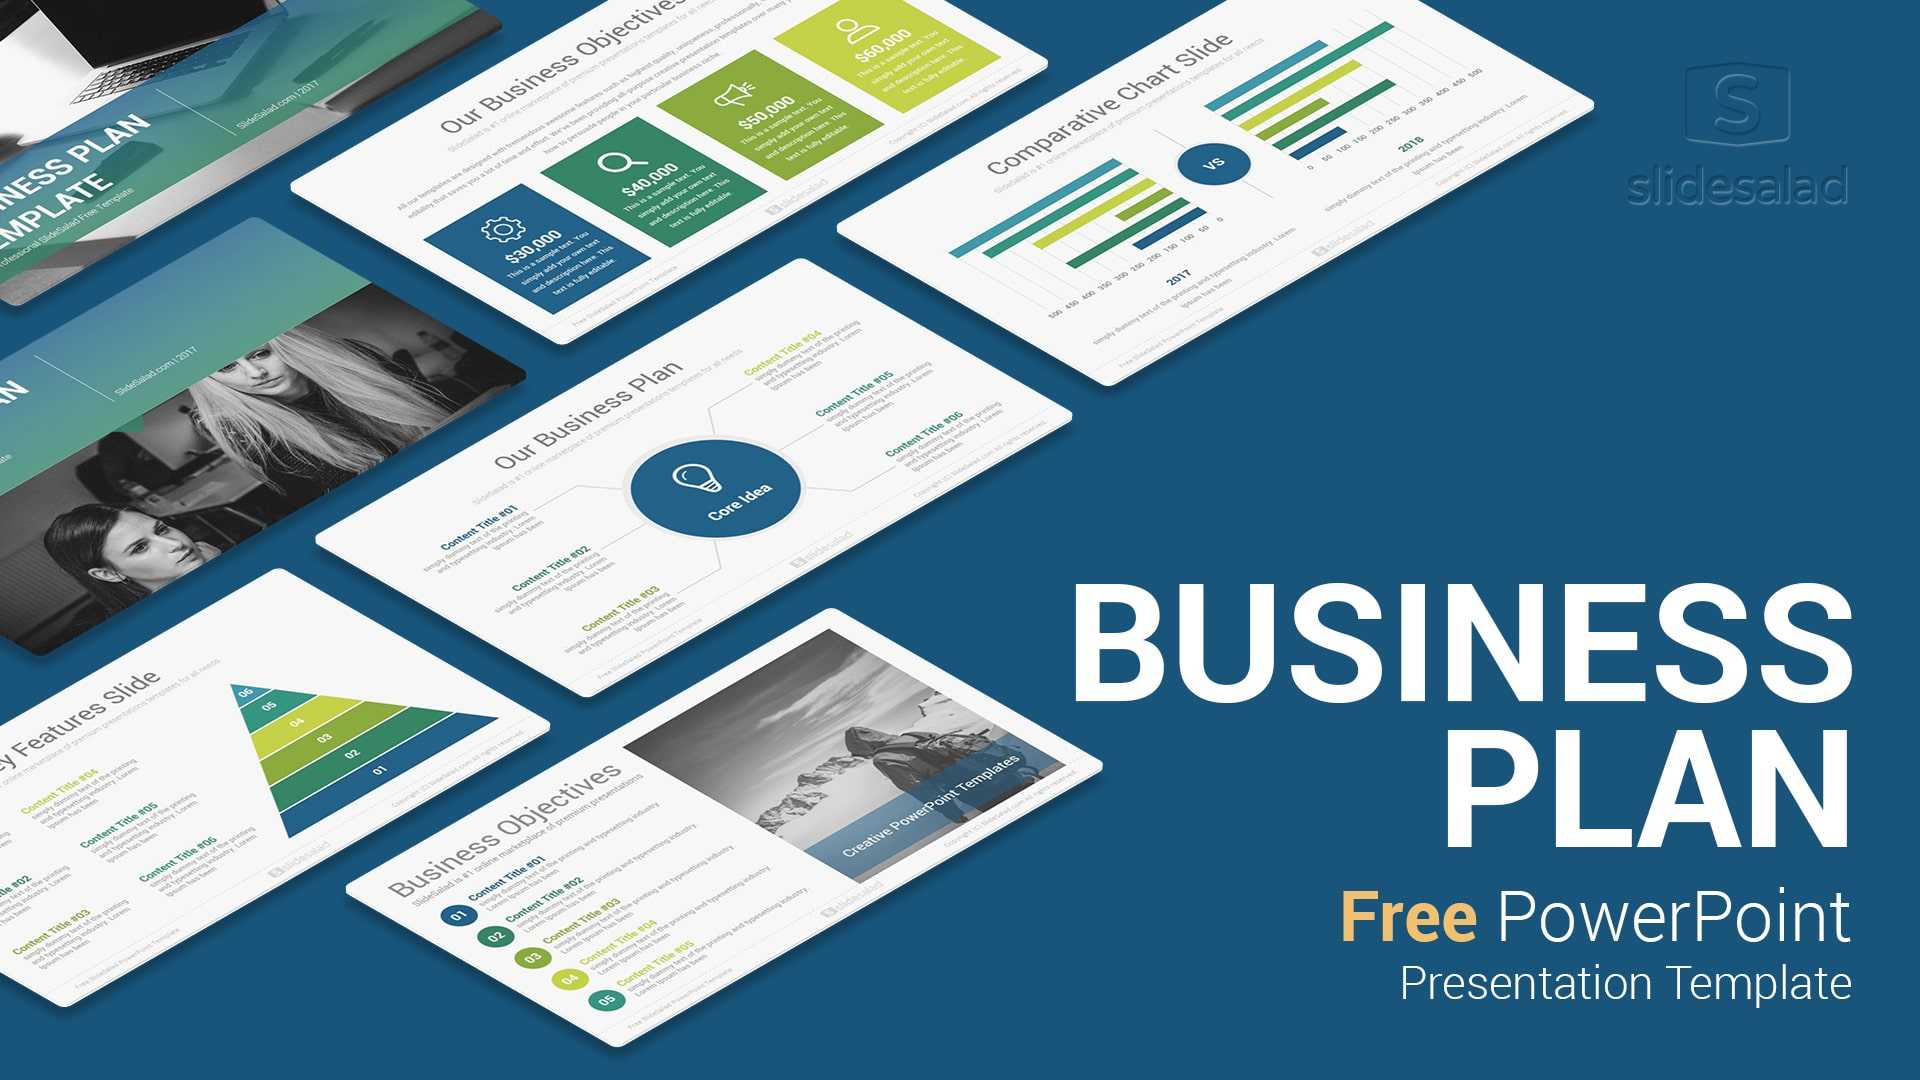 Professional Business Plan Int Templates Free Download Sales For Free Template For Brochure Microsoft Office